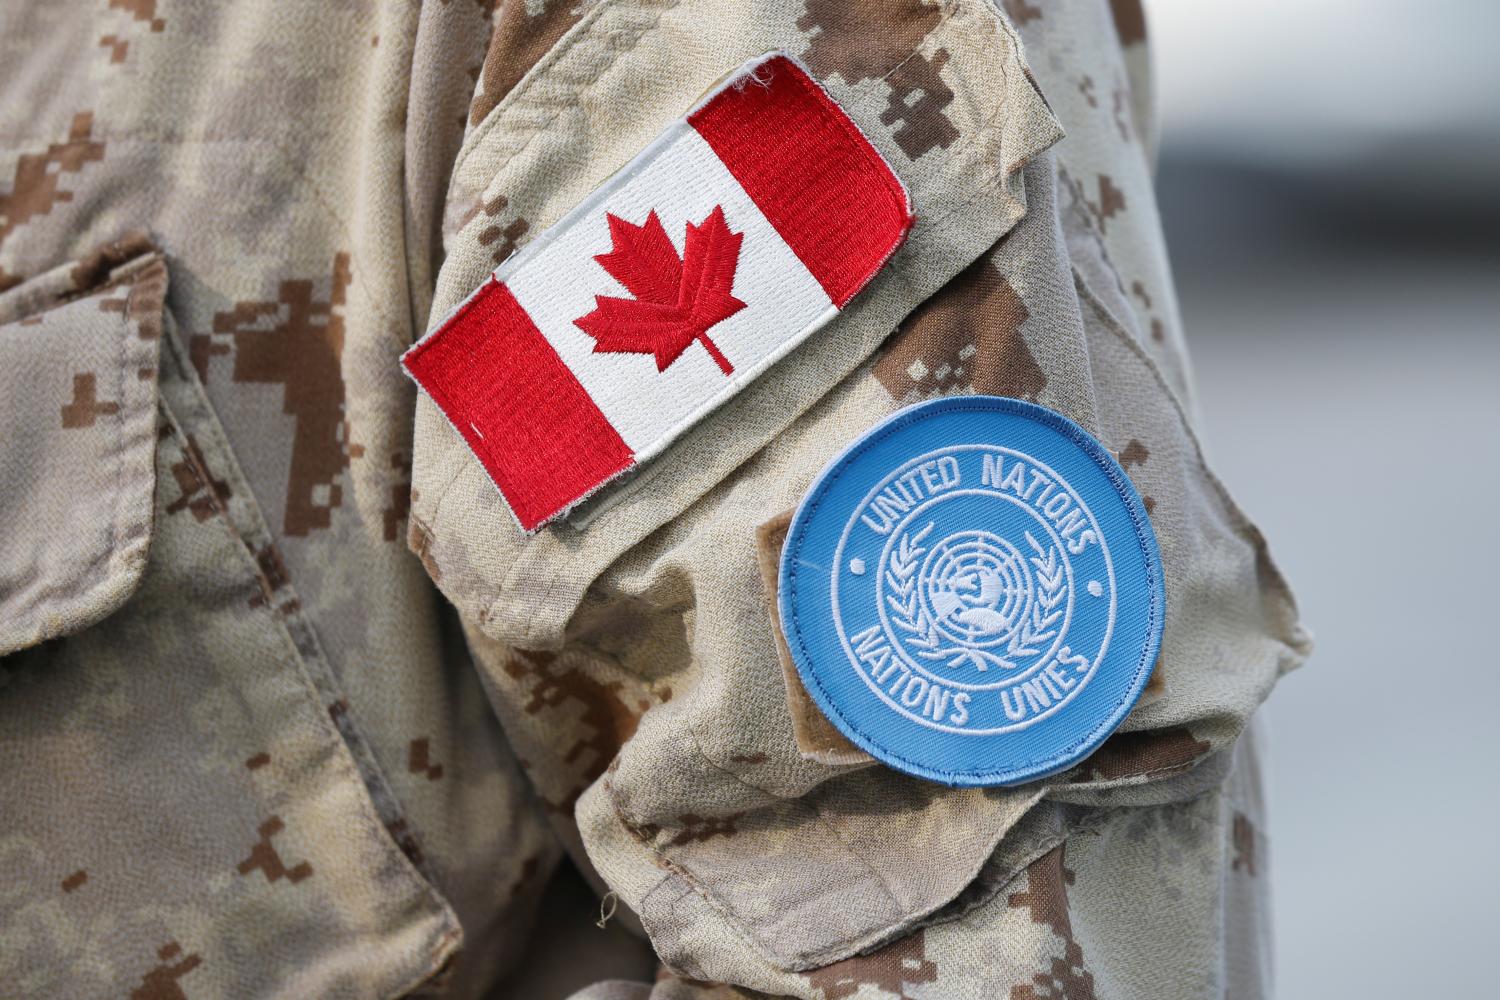 A Canada flag patch and U.N. patch are seen on a member of Canadian Forces before departing for a United Nations peacekeeping mission in Mali, at Canadian Forces Base Trenton in Trenton, Ontario, Canada, July 5, 2018. REUTERS/Chris Wattie - RC1B5D228C00